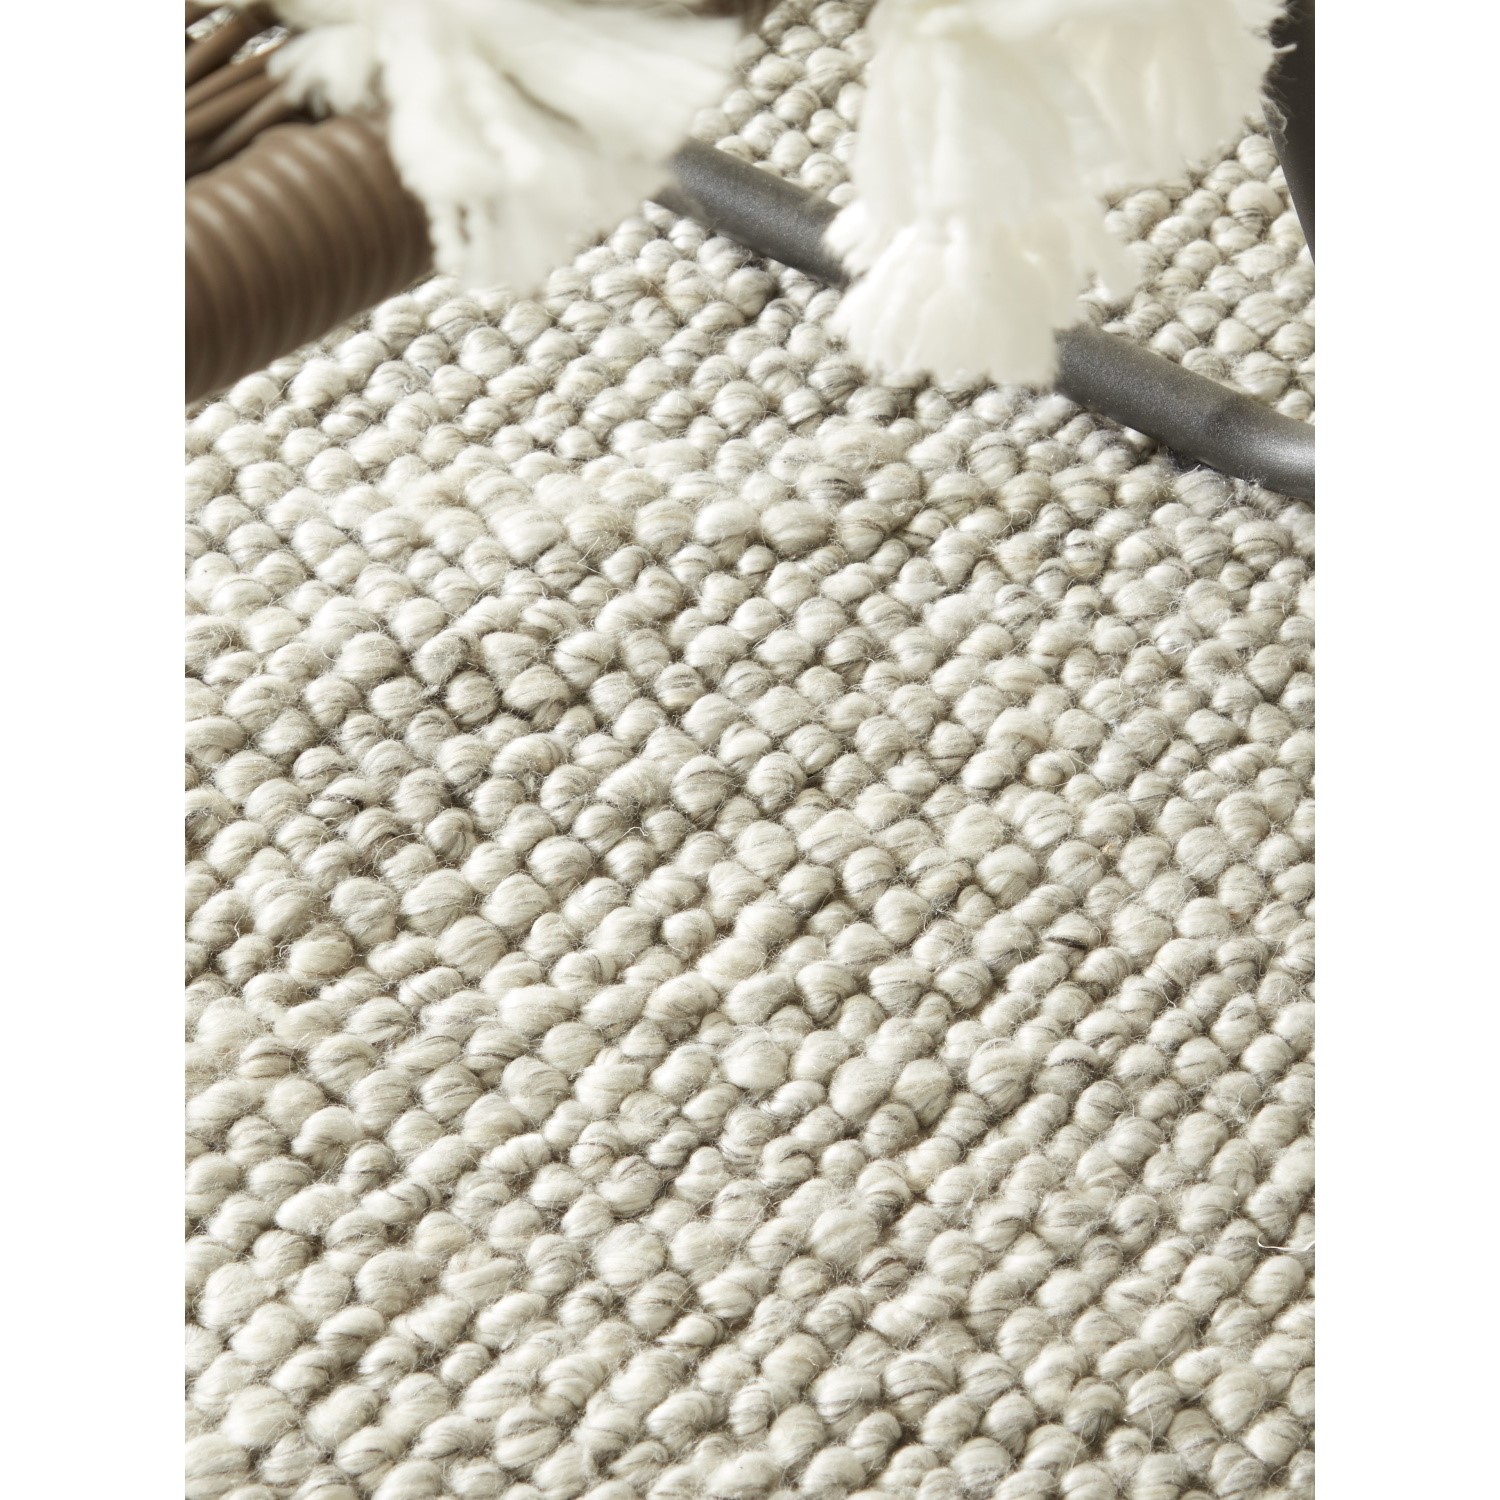 Read more about La playa textured rug in silver 120x170 cm